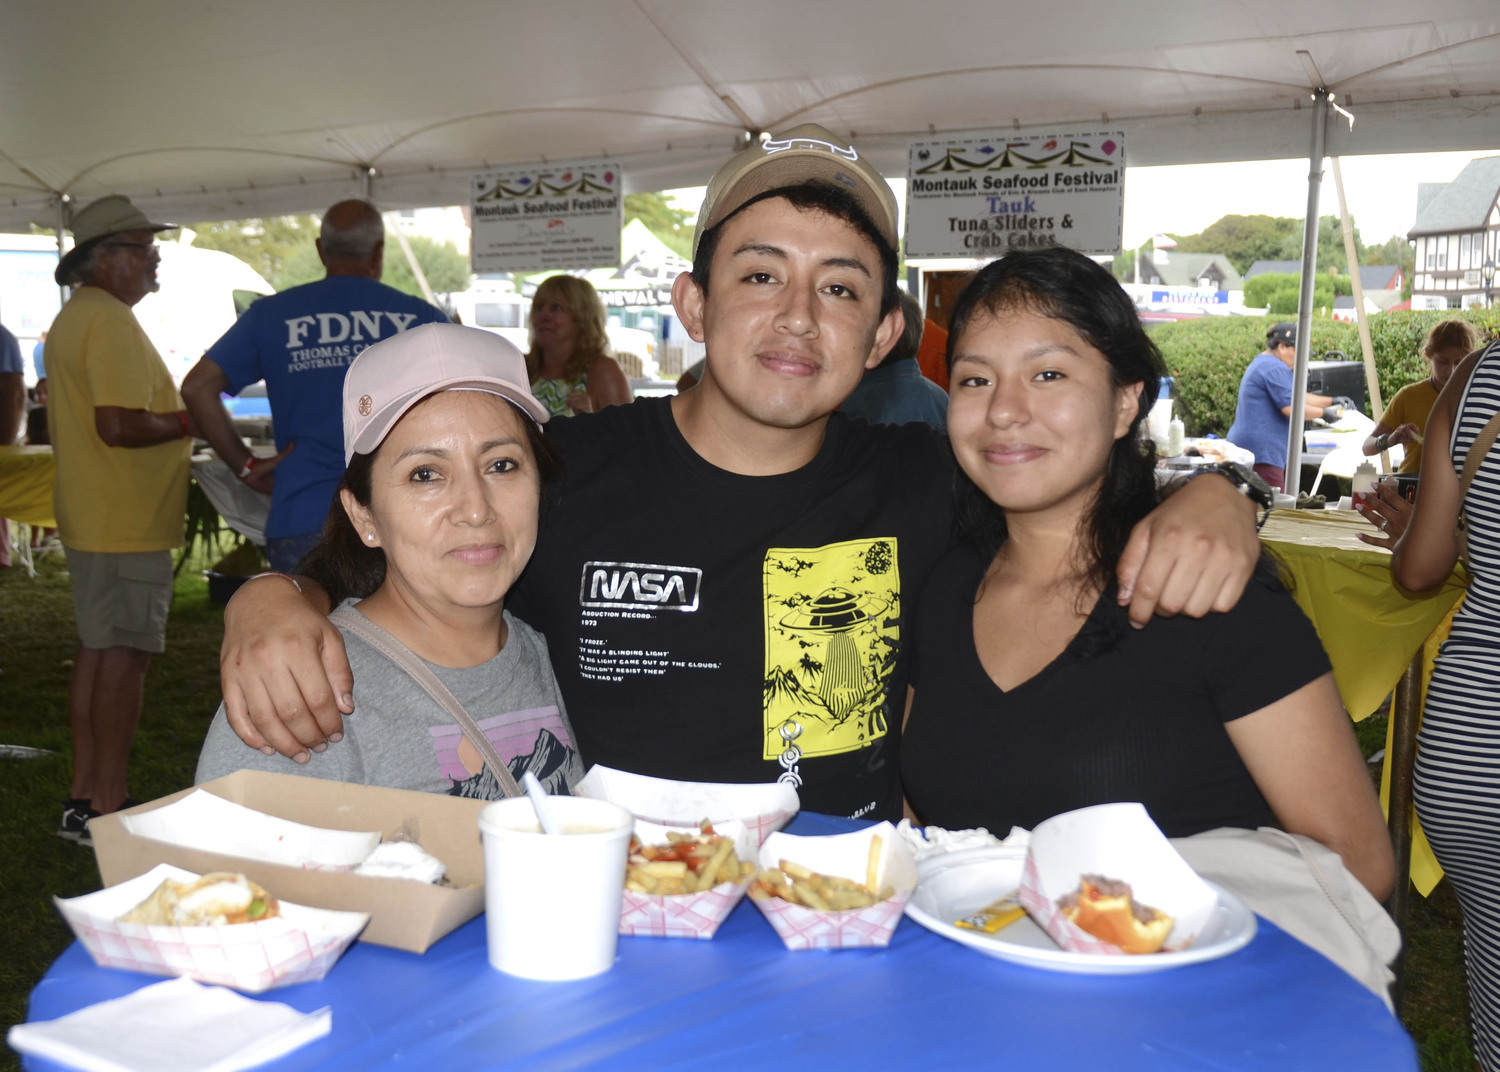 Fanny Mejia, Jonny Saltos and Valeria Macas at the Montauk Seafood Festival on Sunday to Benefit the Montauk Friends of Erin and the Kiwanis Club of East Hampton .  KYRIL BROMLEY